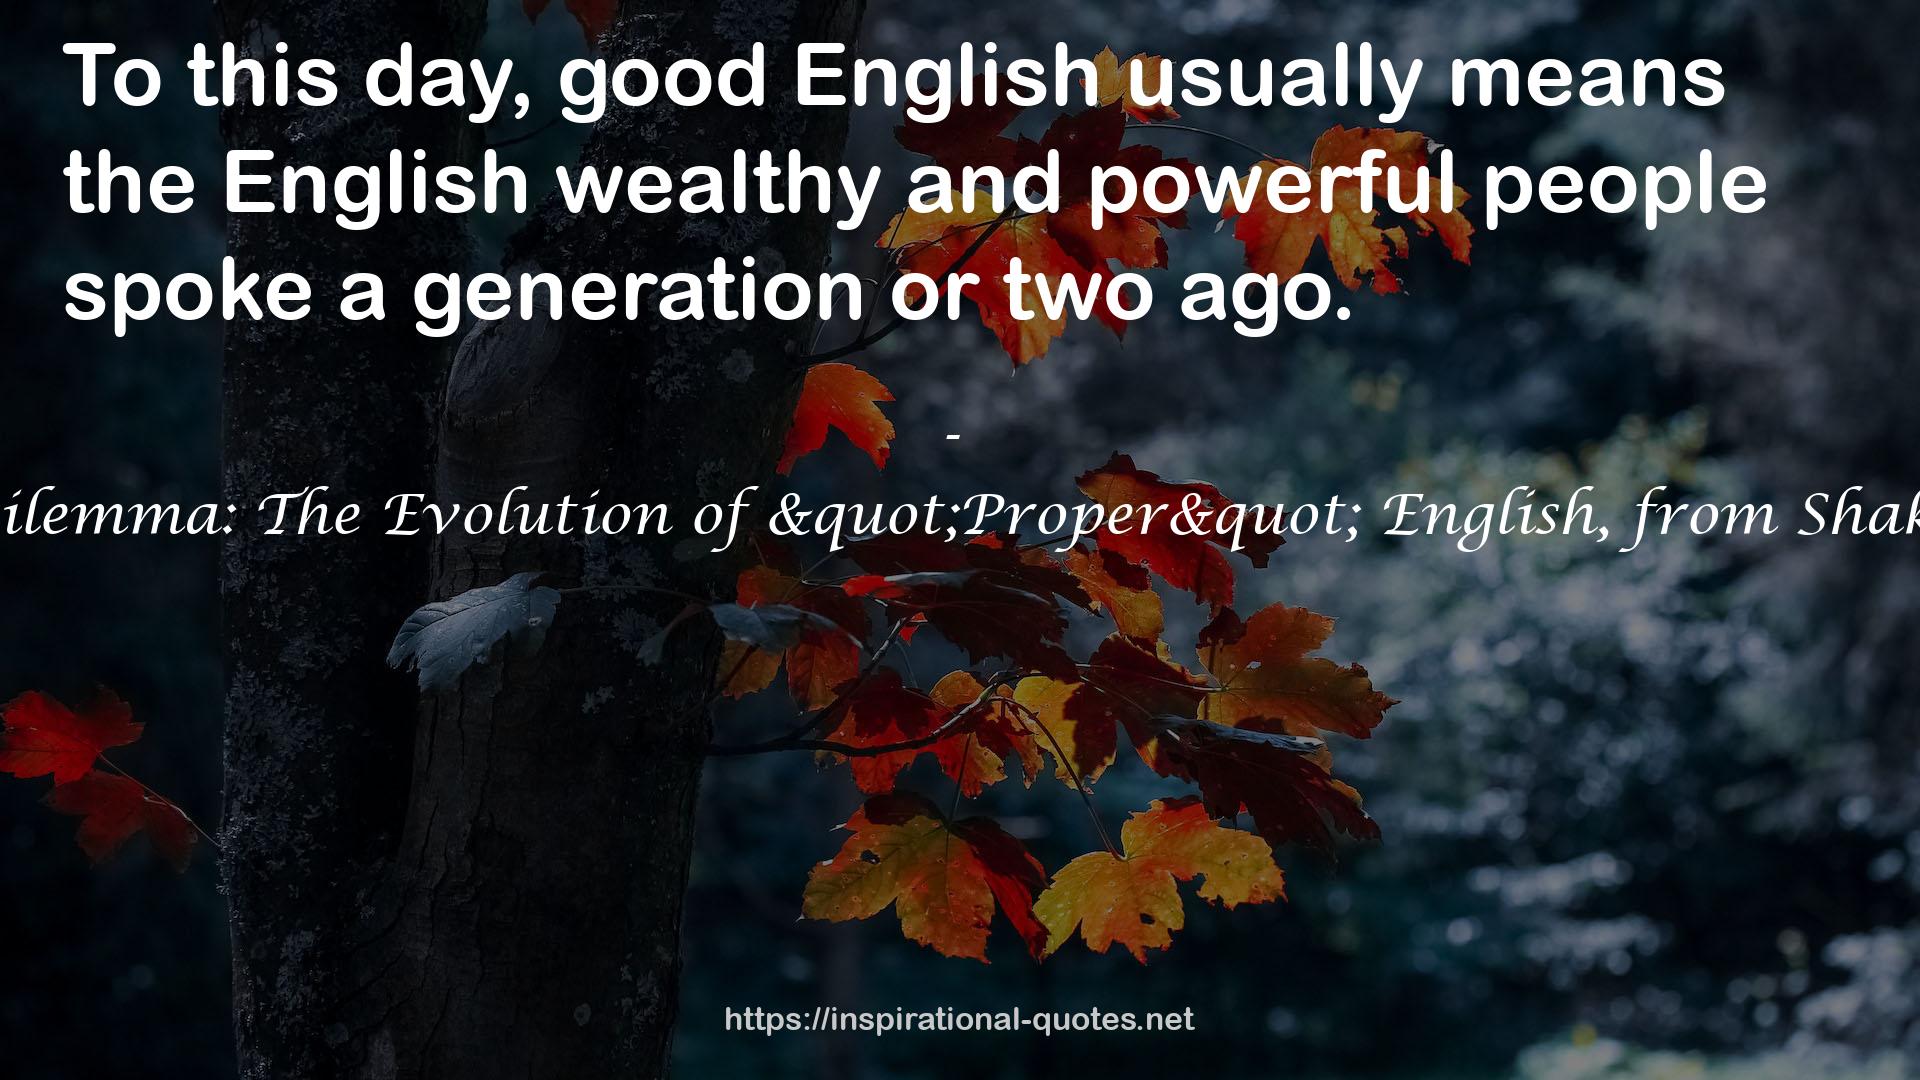 The Lexicographer's Dilemma: The Evolution of "Proper" English, from Shakespeare to South Park QUOTES